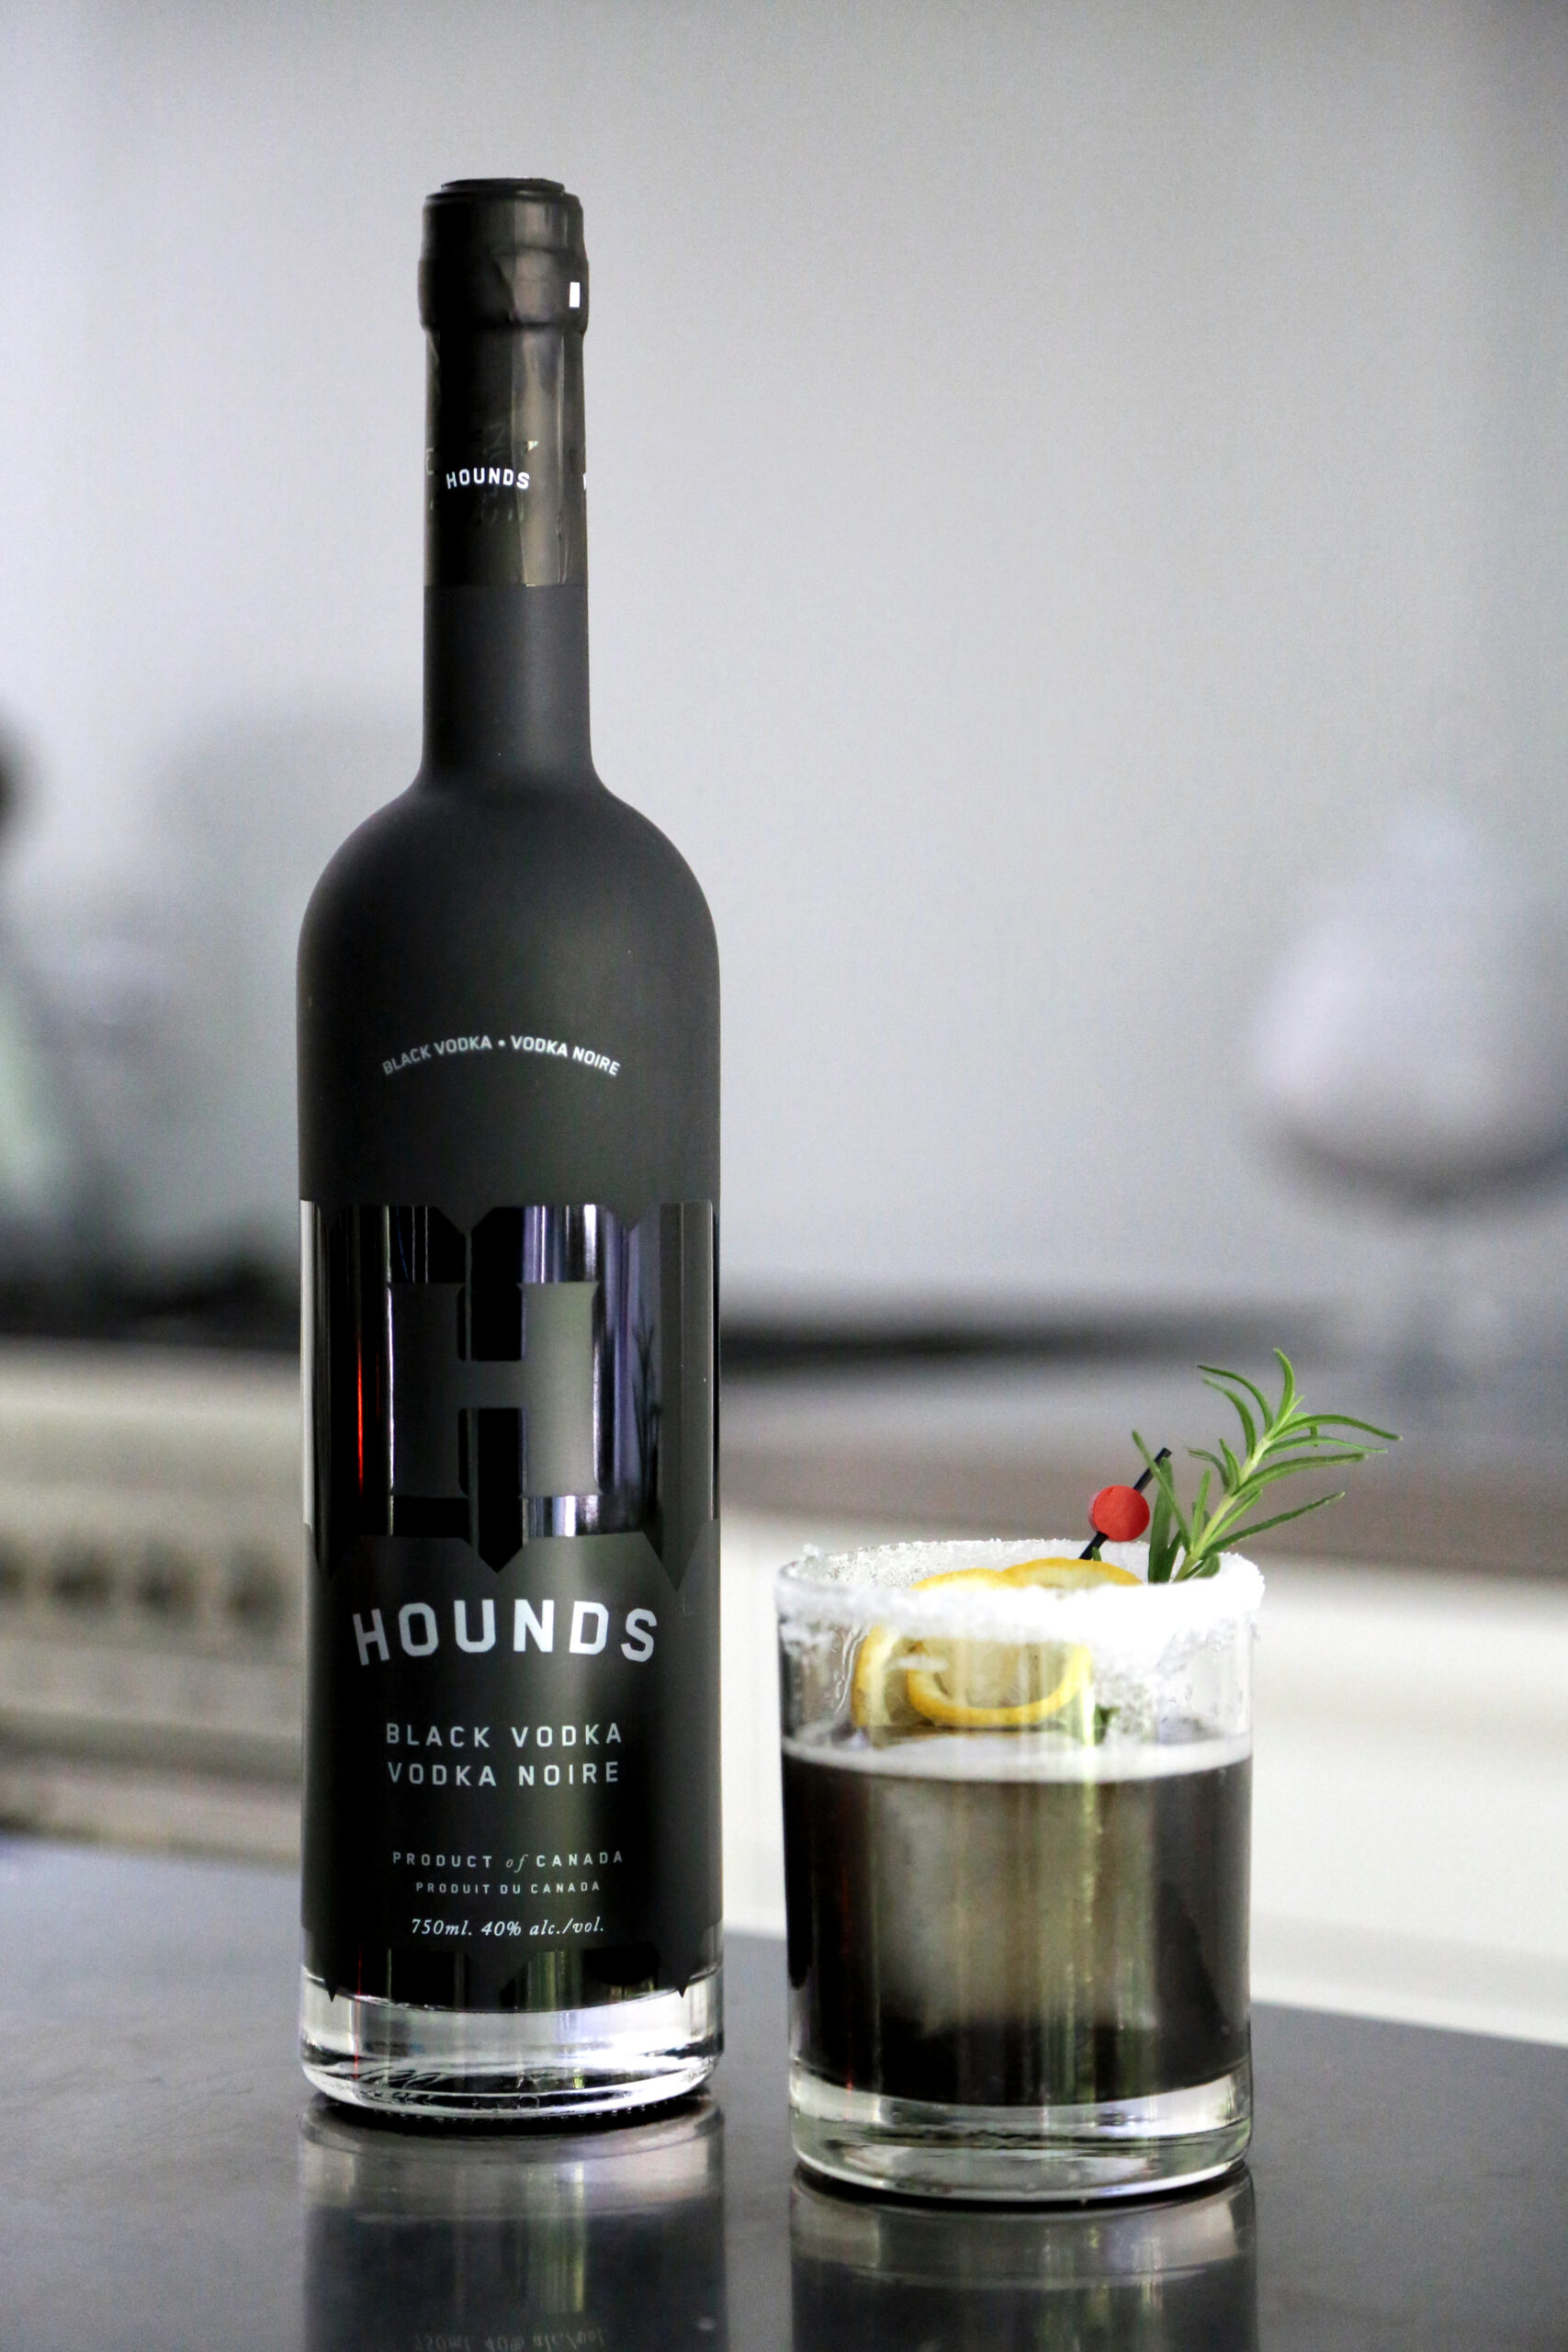 2 Recipes Using This Stunning Black Vodka Distilled in Canada